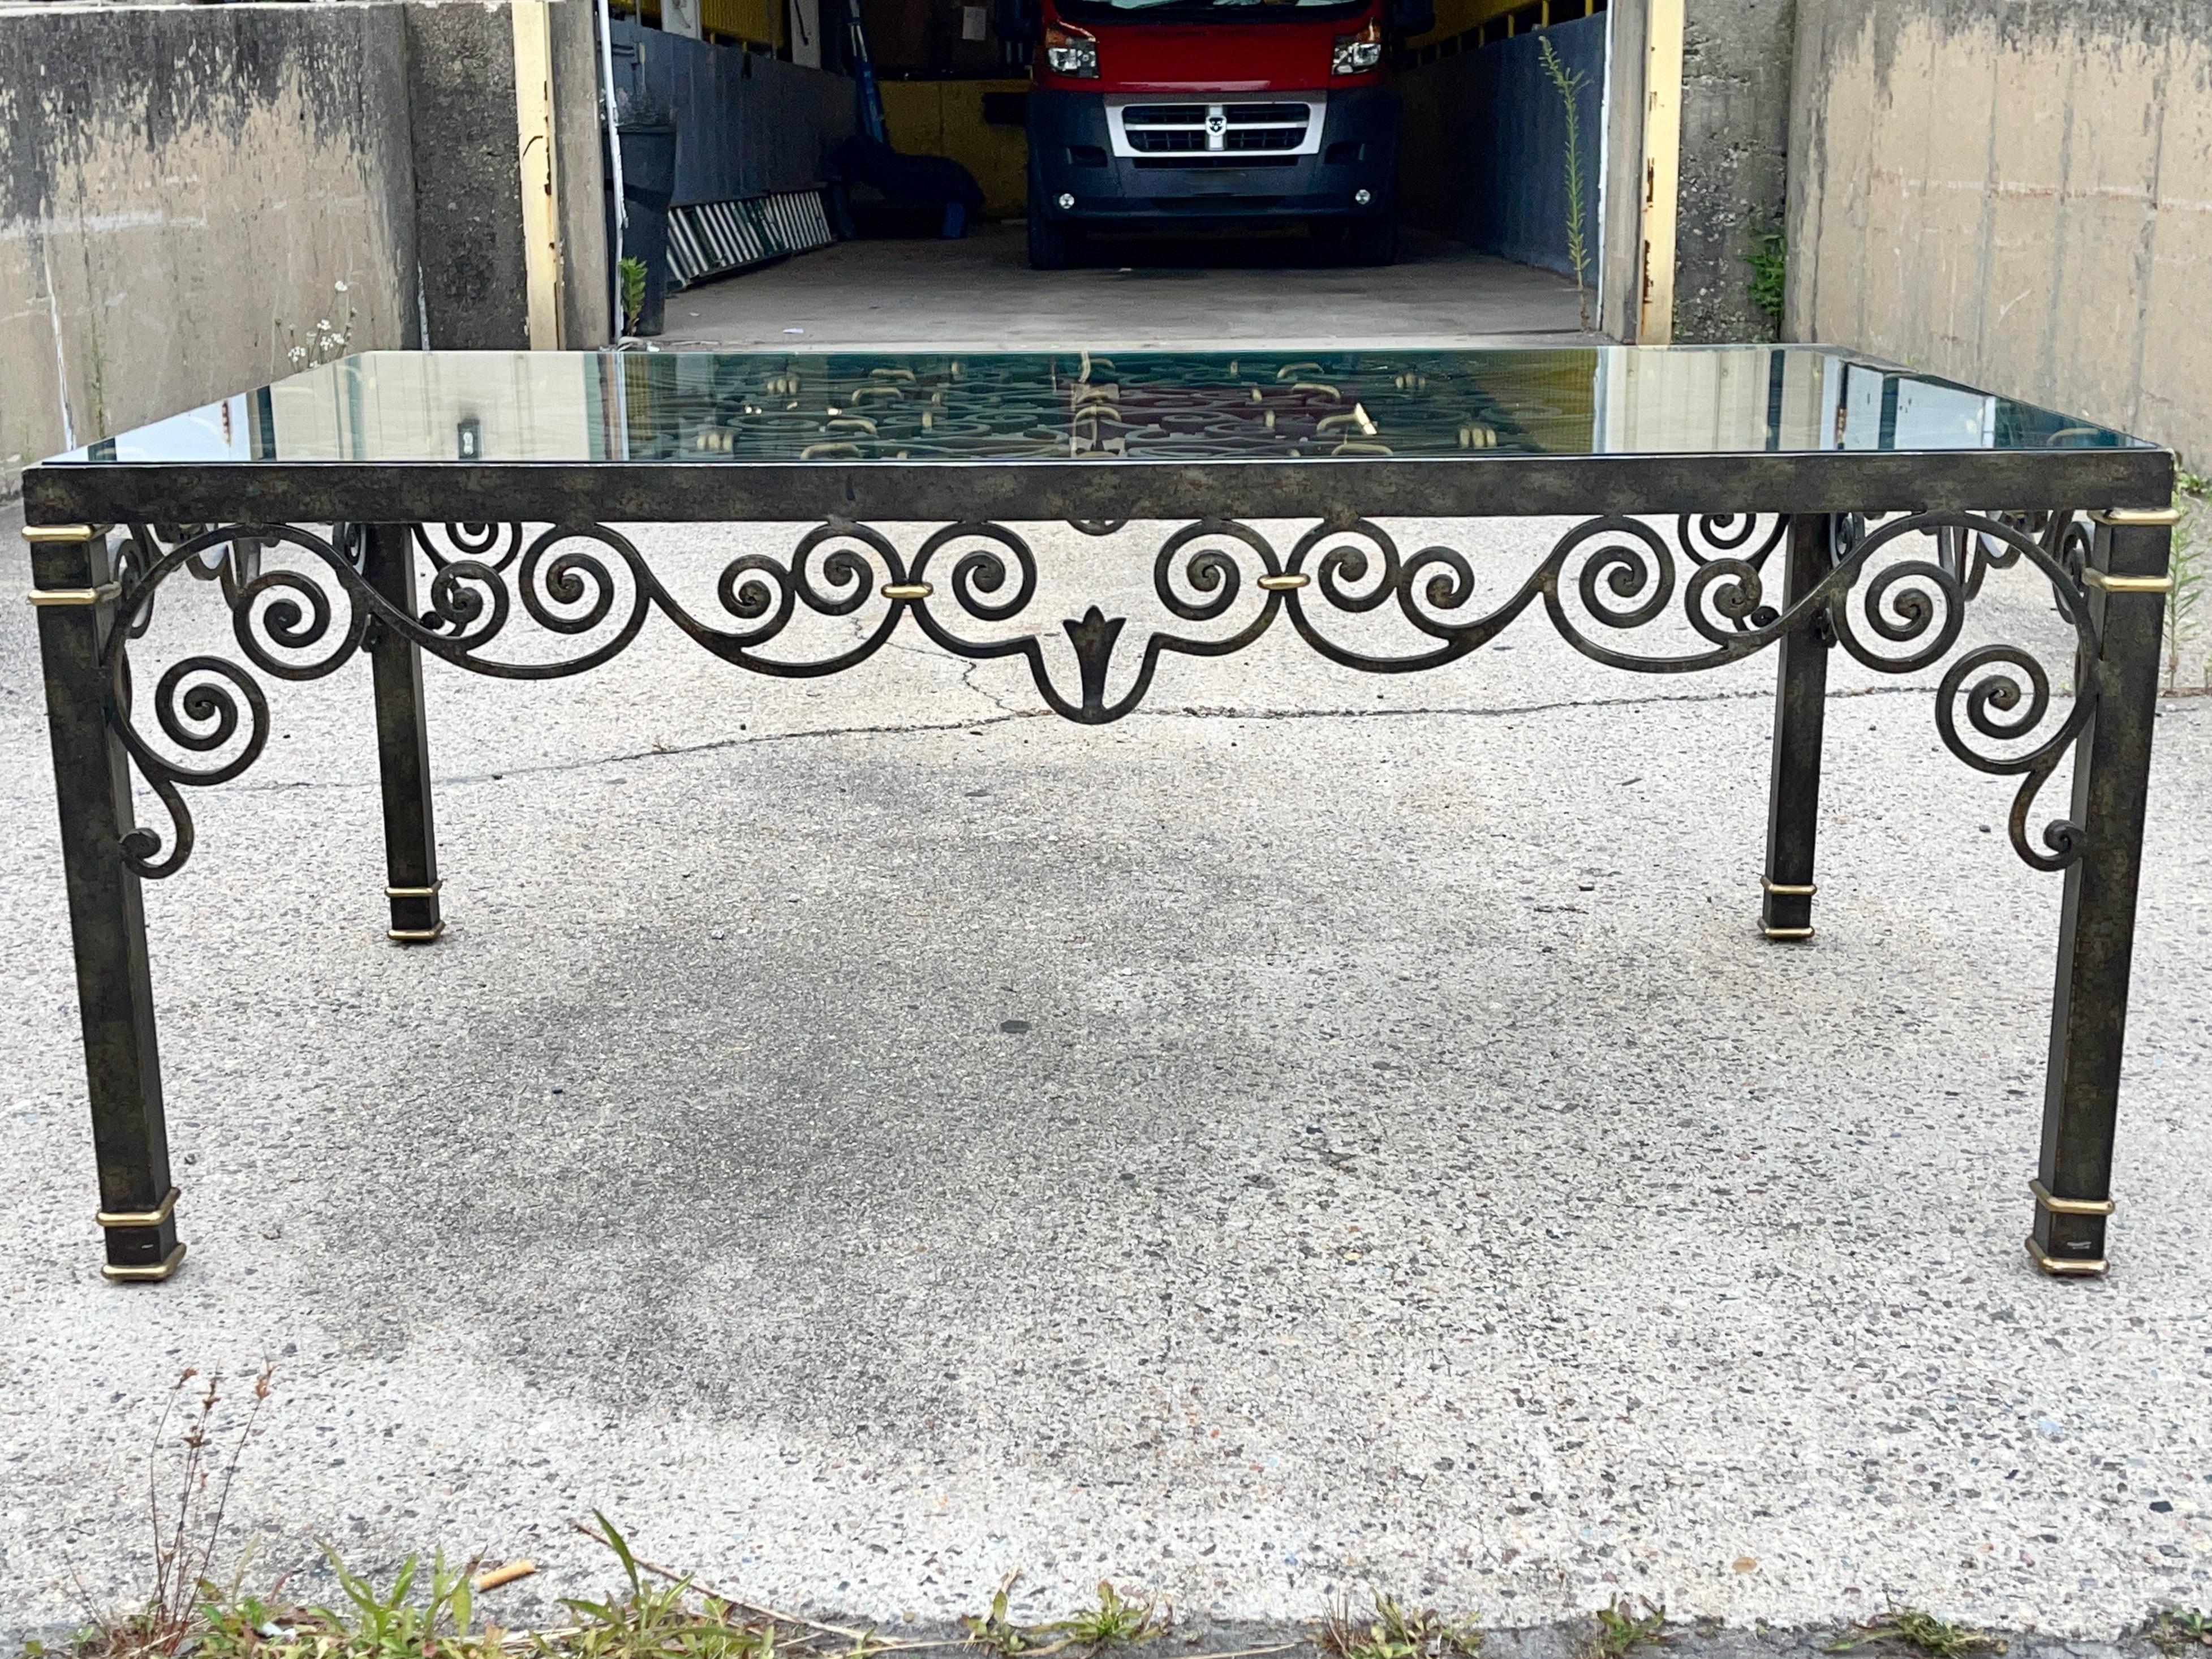 Philippine LaBarge Wrought Iron, Brass & Glass Cocktail Table For Sale